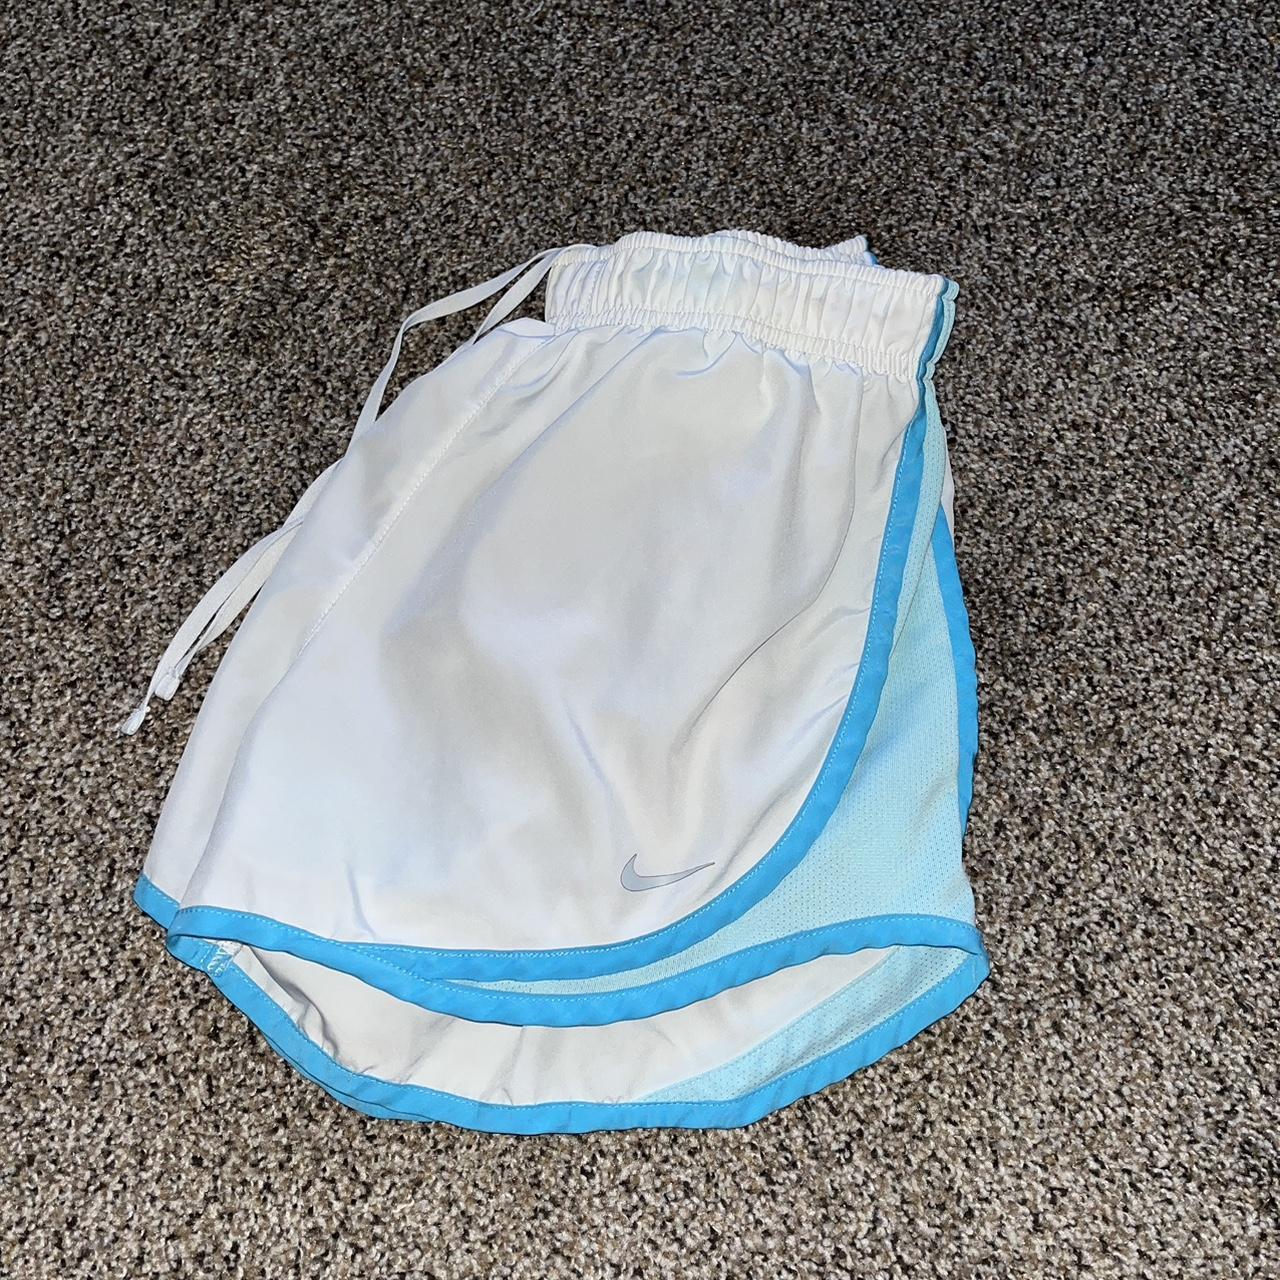 Small Nike running shorts with built-in underwear - Depop